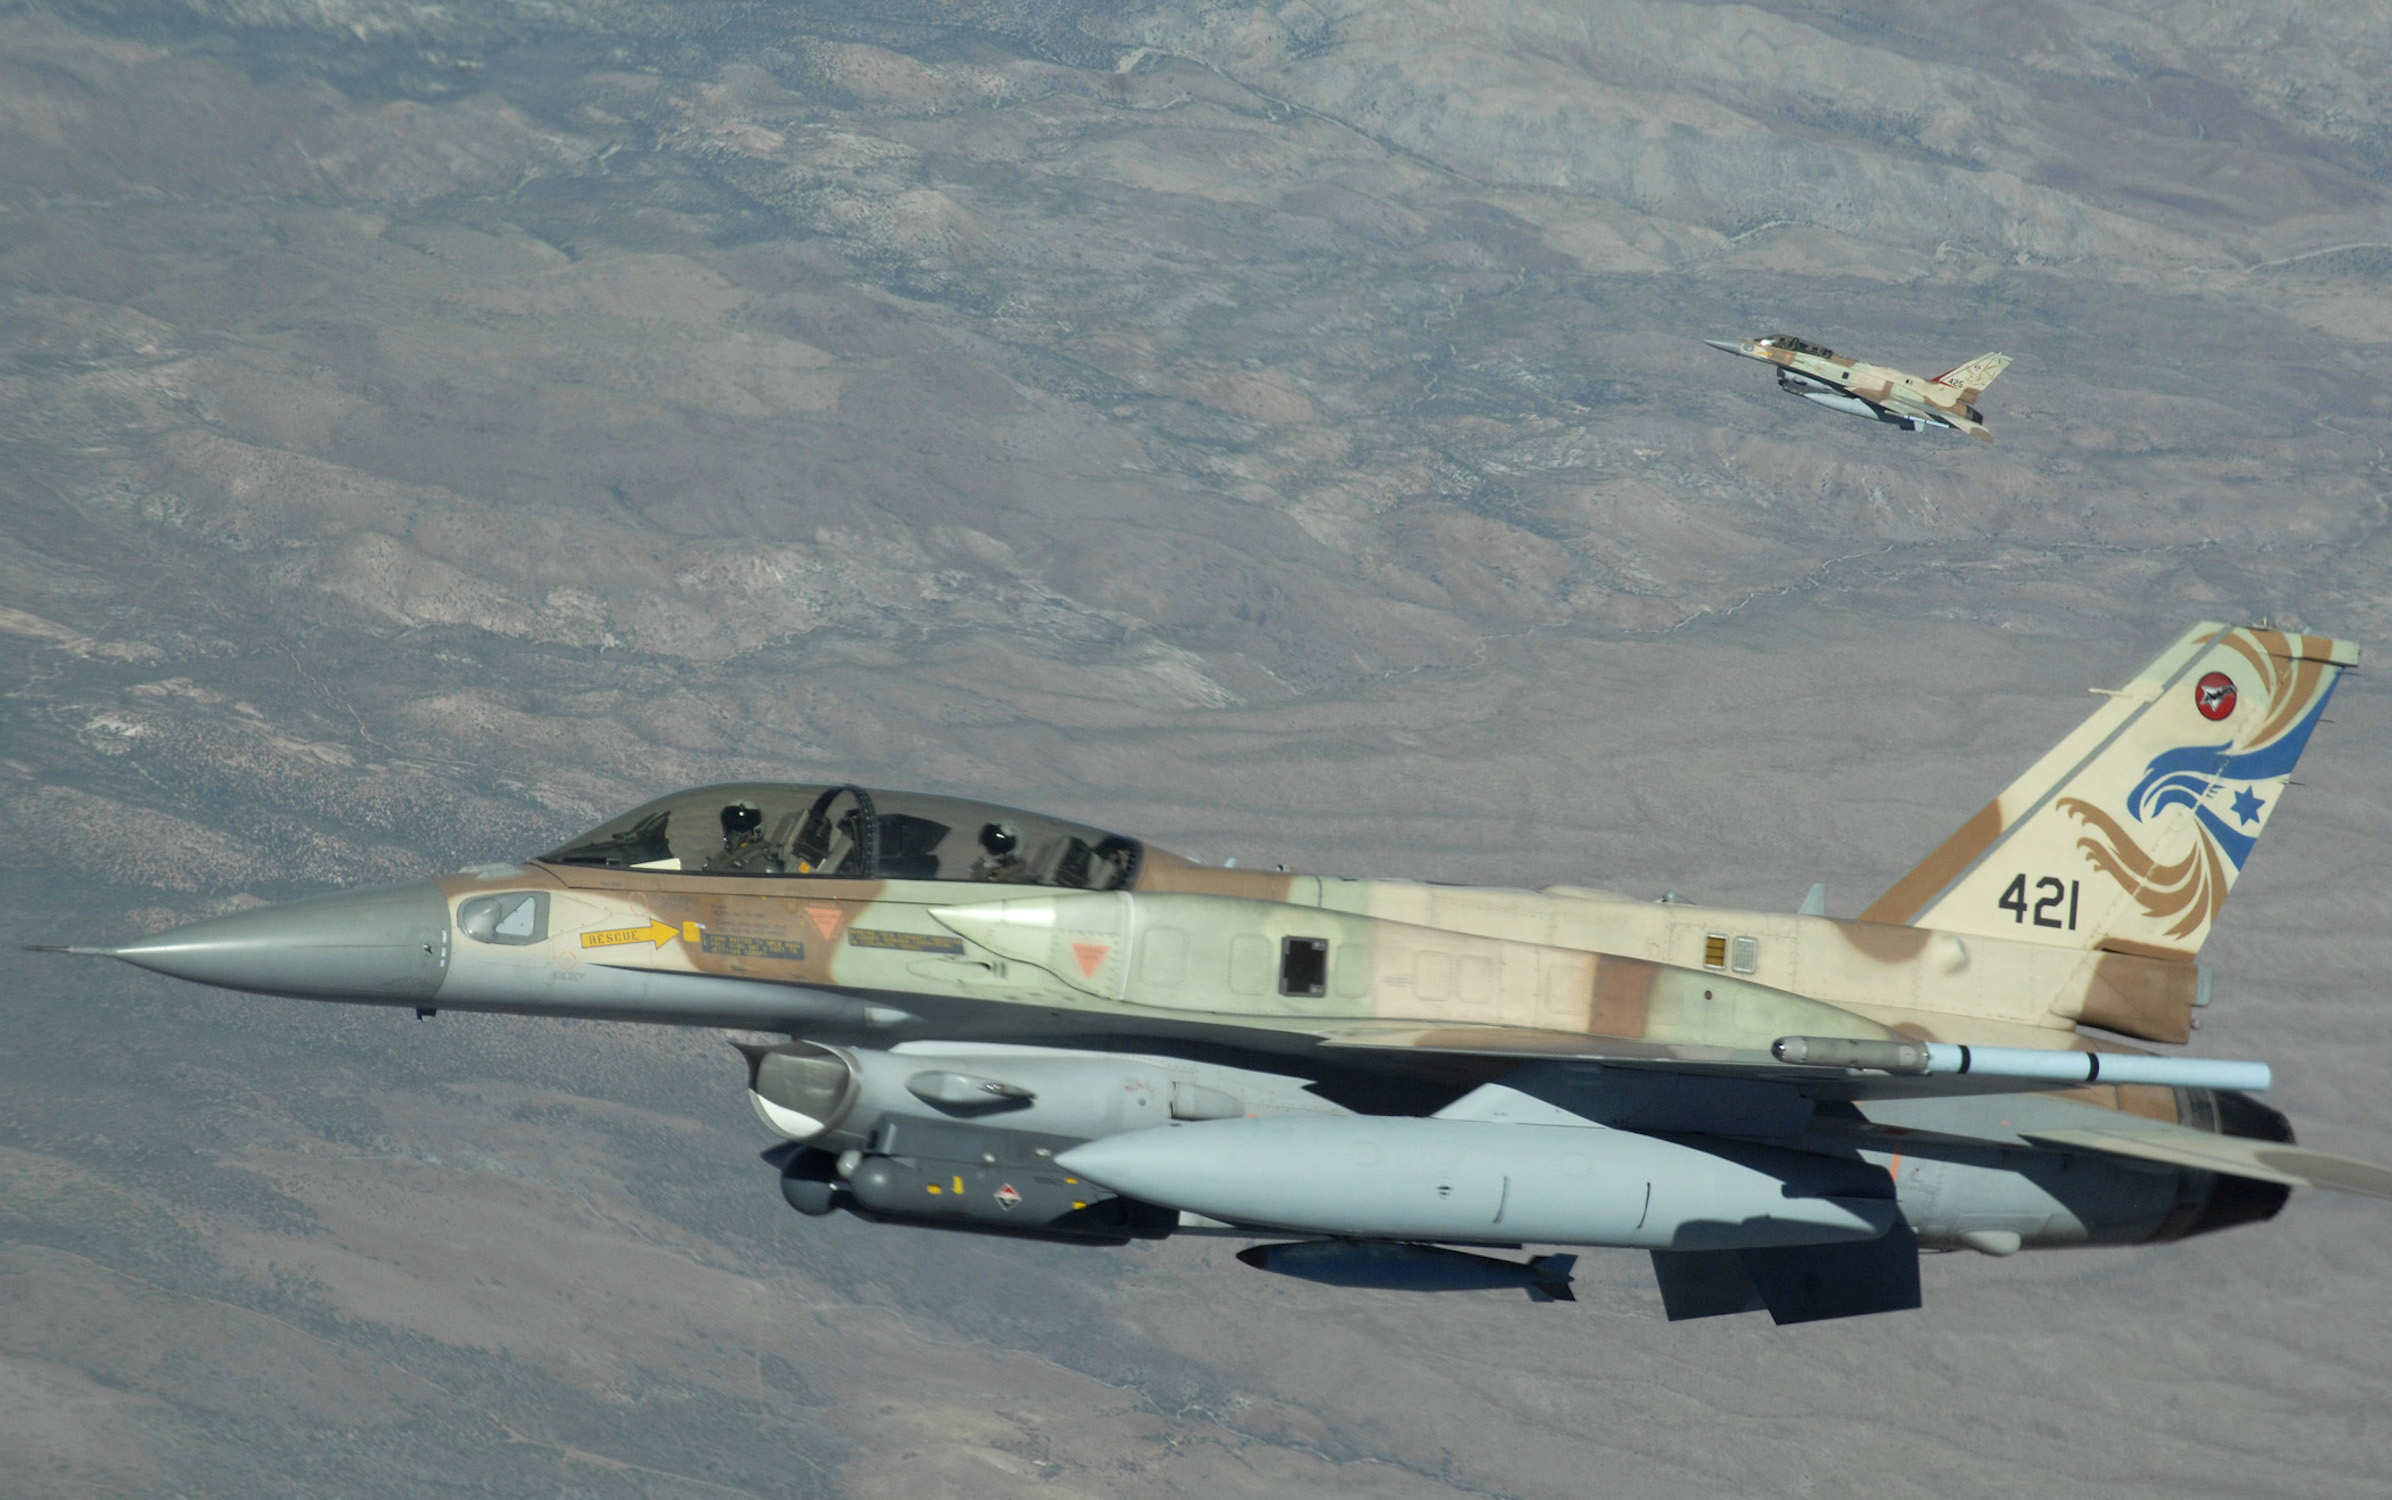 Israel Air Force F-16 jets